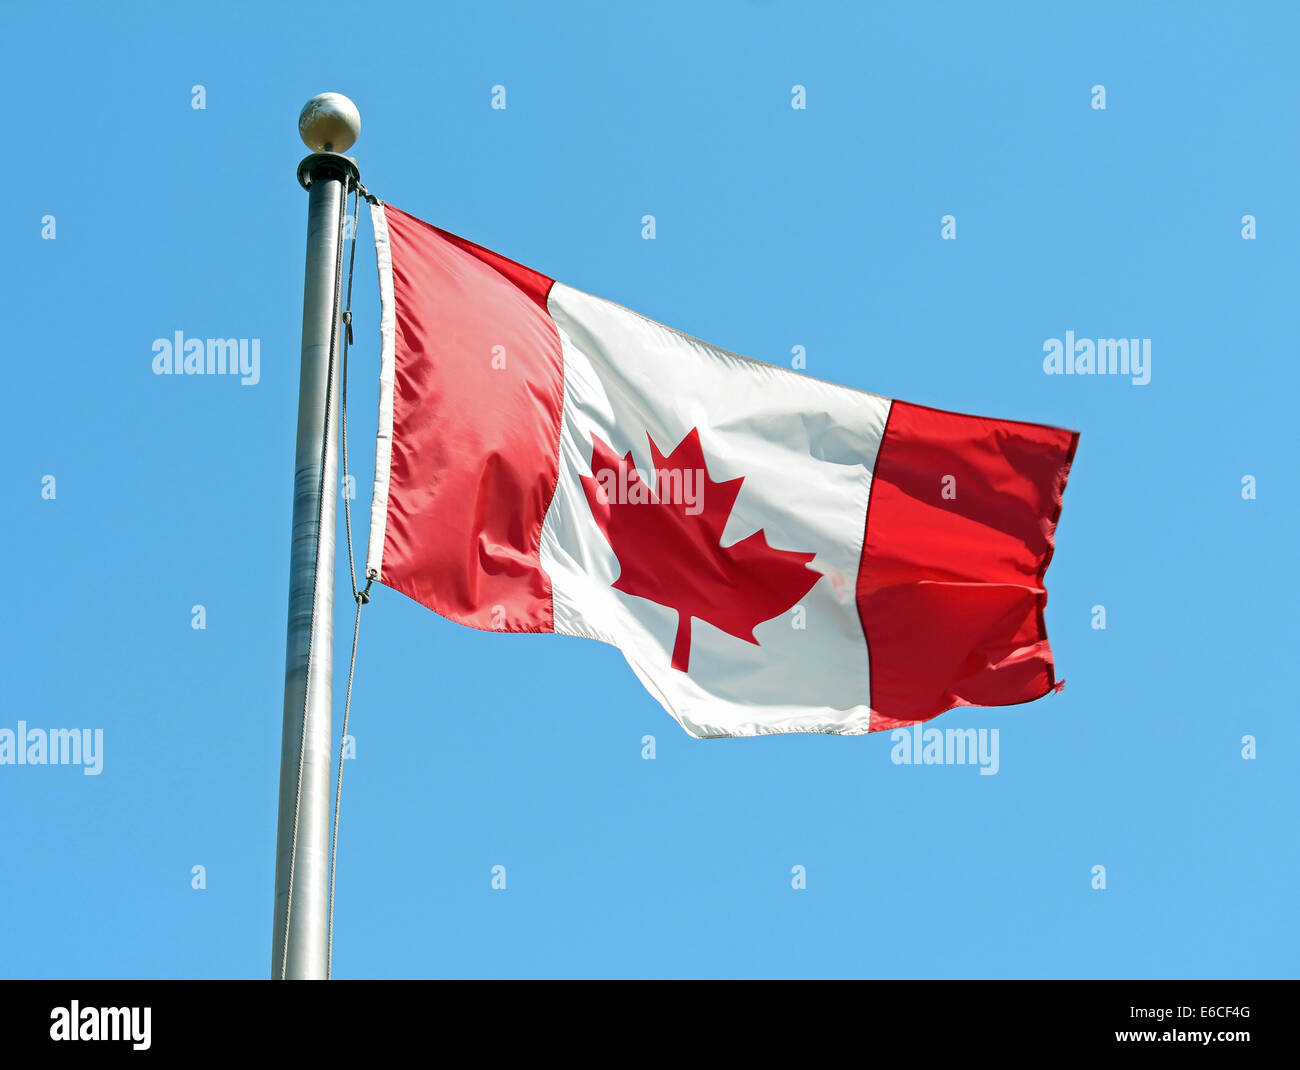 A Canadian flag waving in the wind against a blue sky Stock Photo